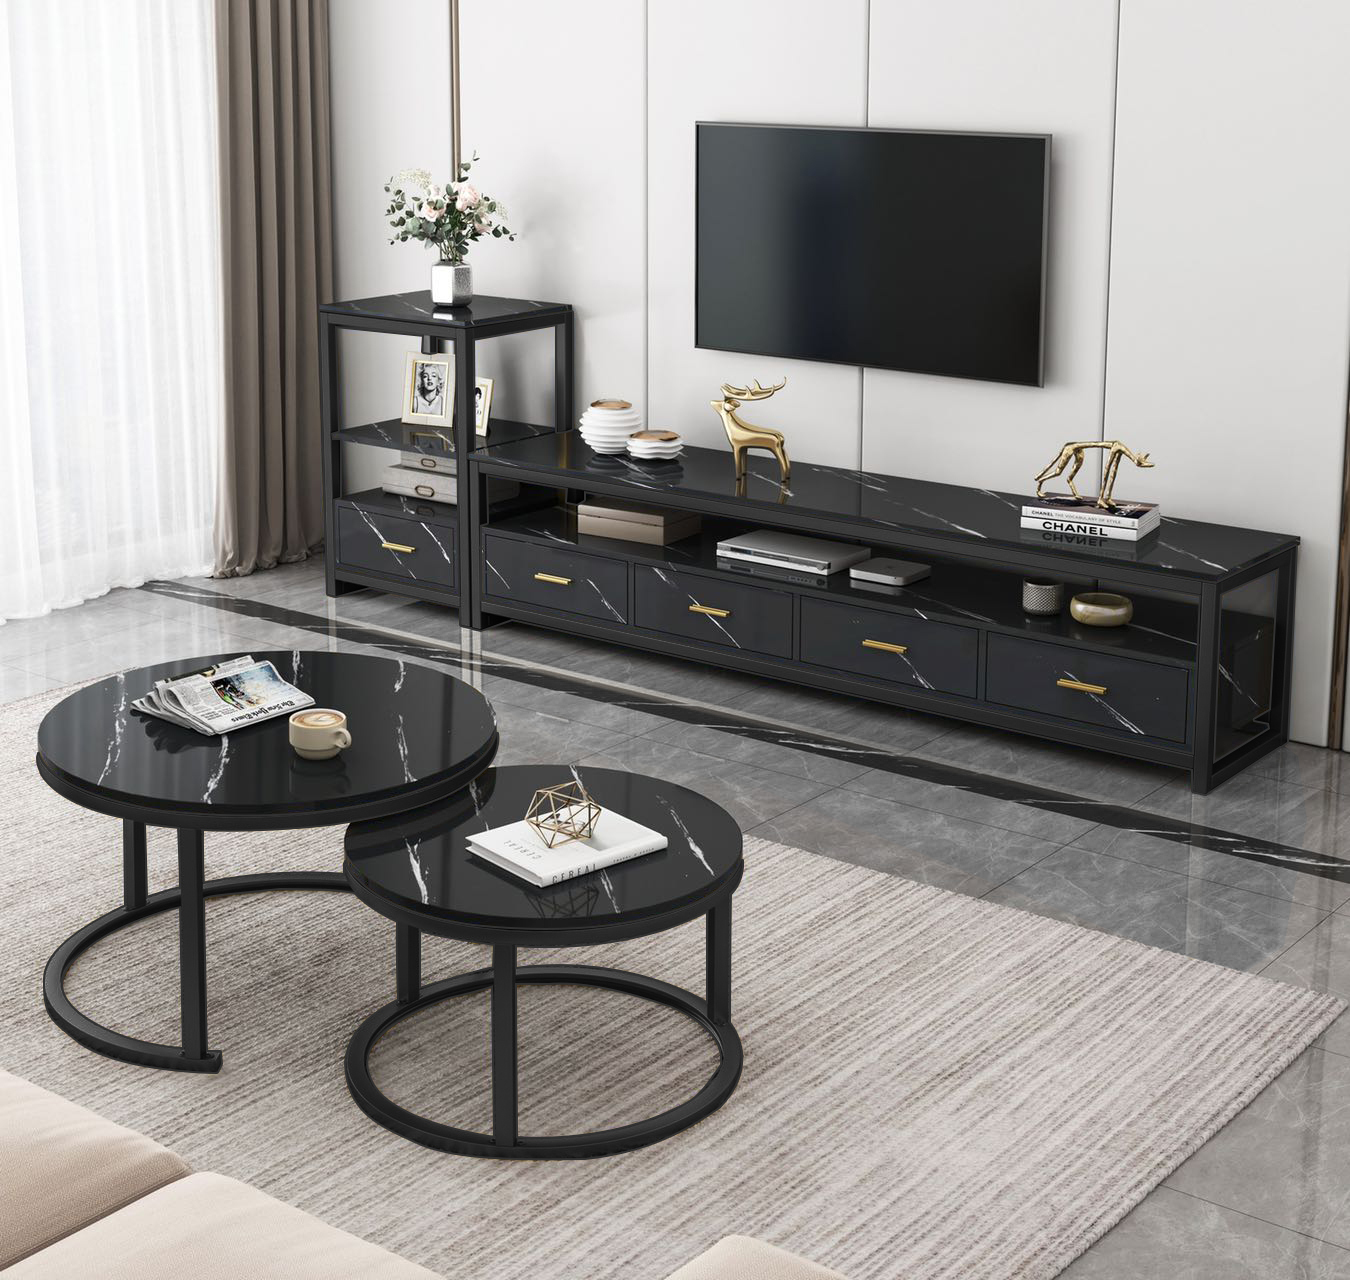 3-Piece Set Synergy Luxury Marble Look Coffee Table, TV Cabinet & Side Table (Black)